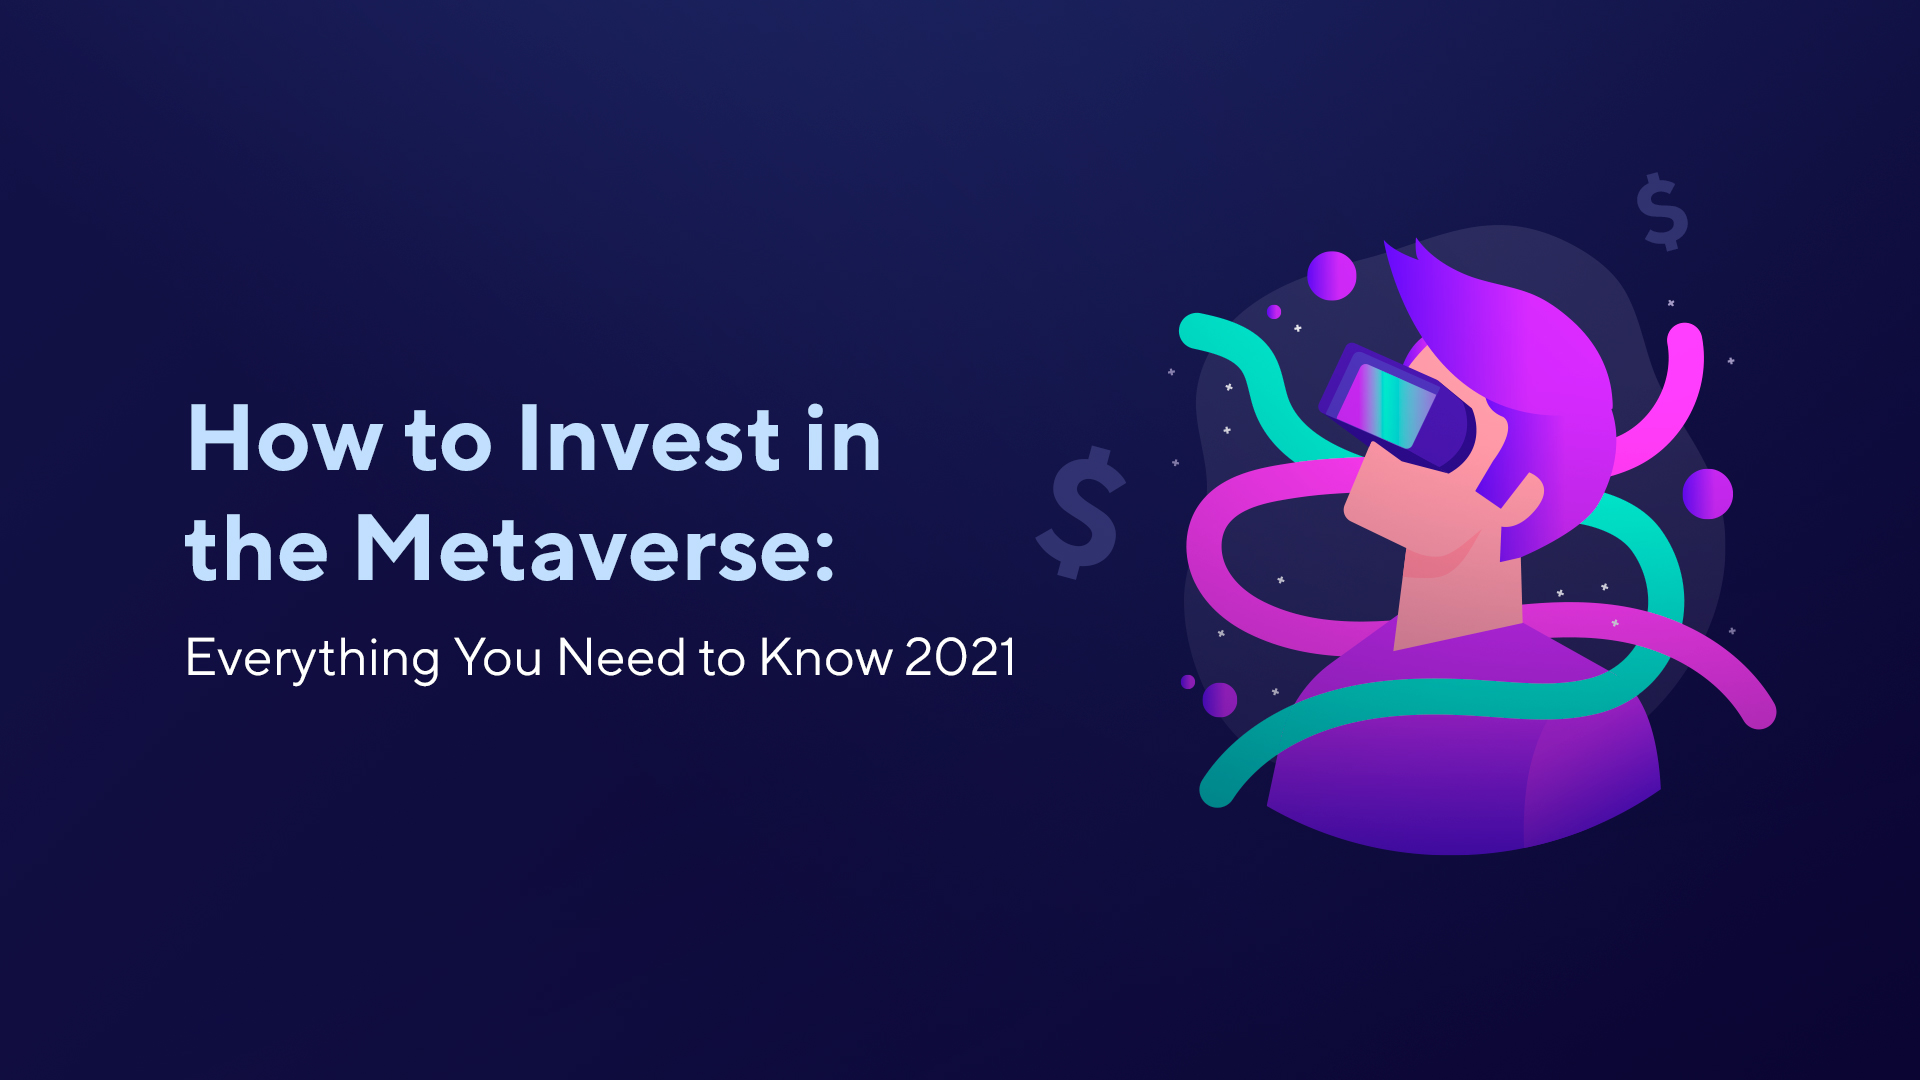 How to Invest in the Metaverse: Everything You Need to Know 2021